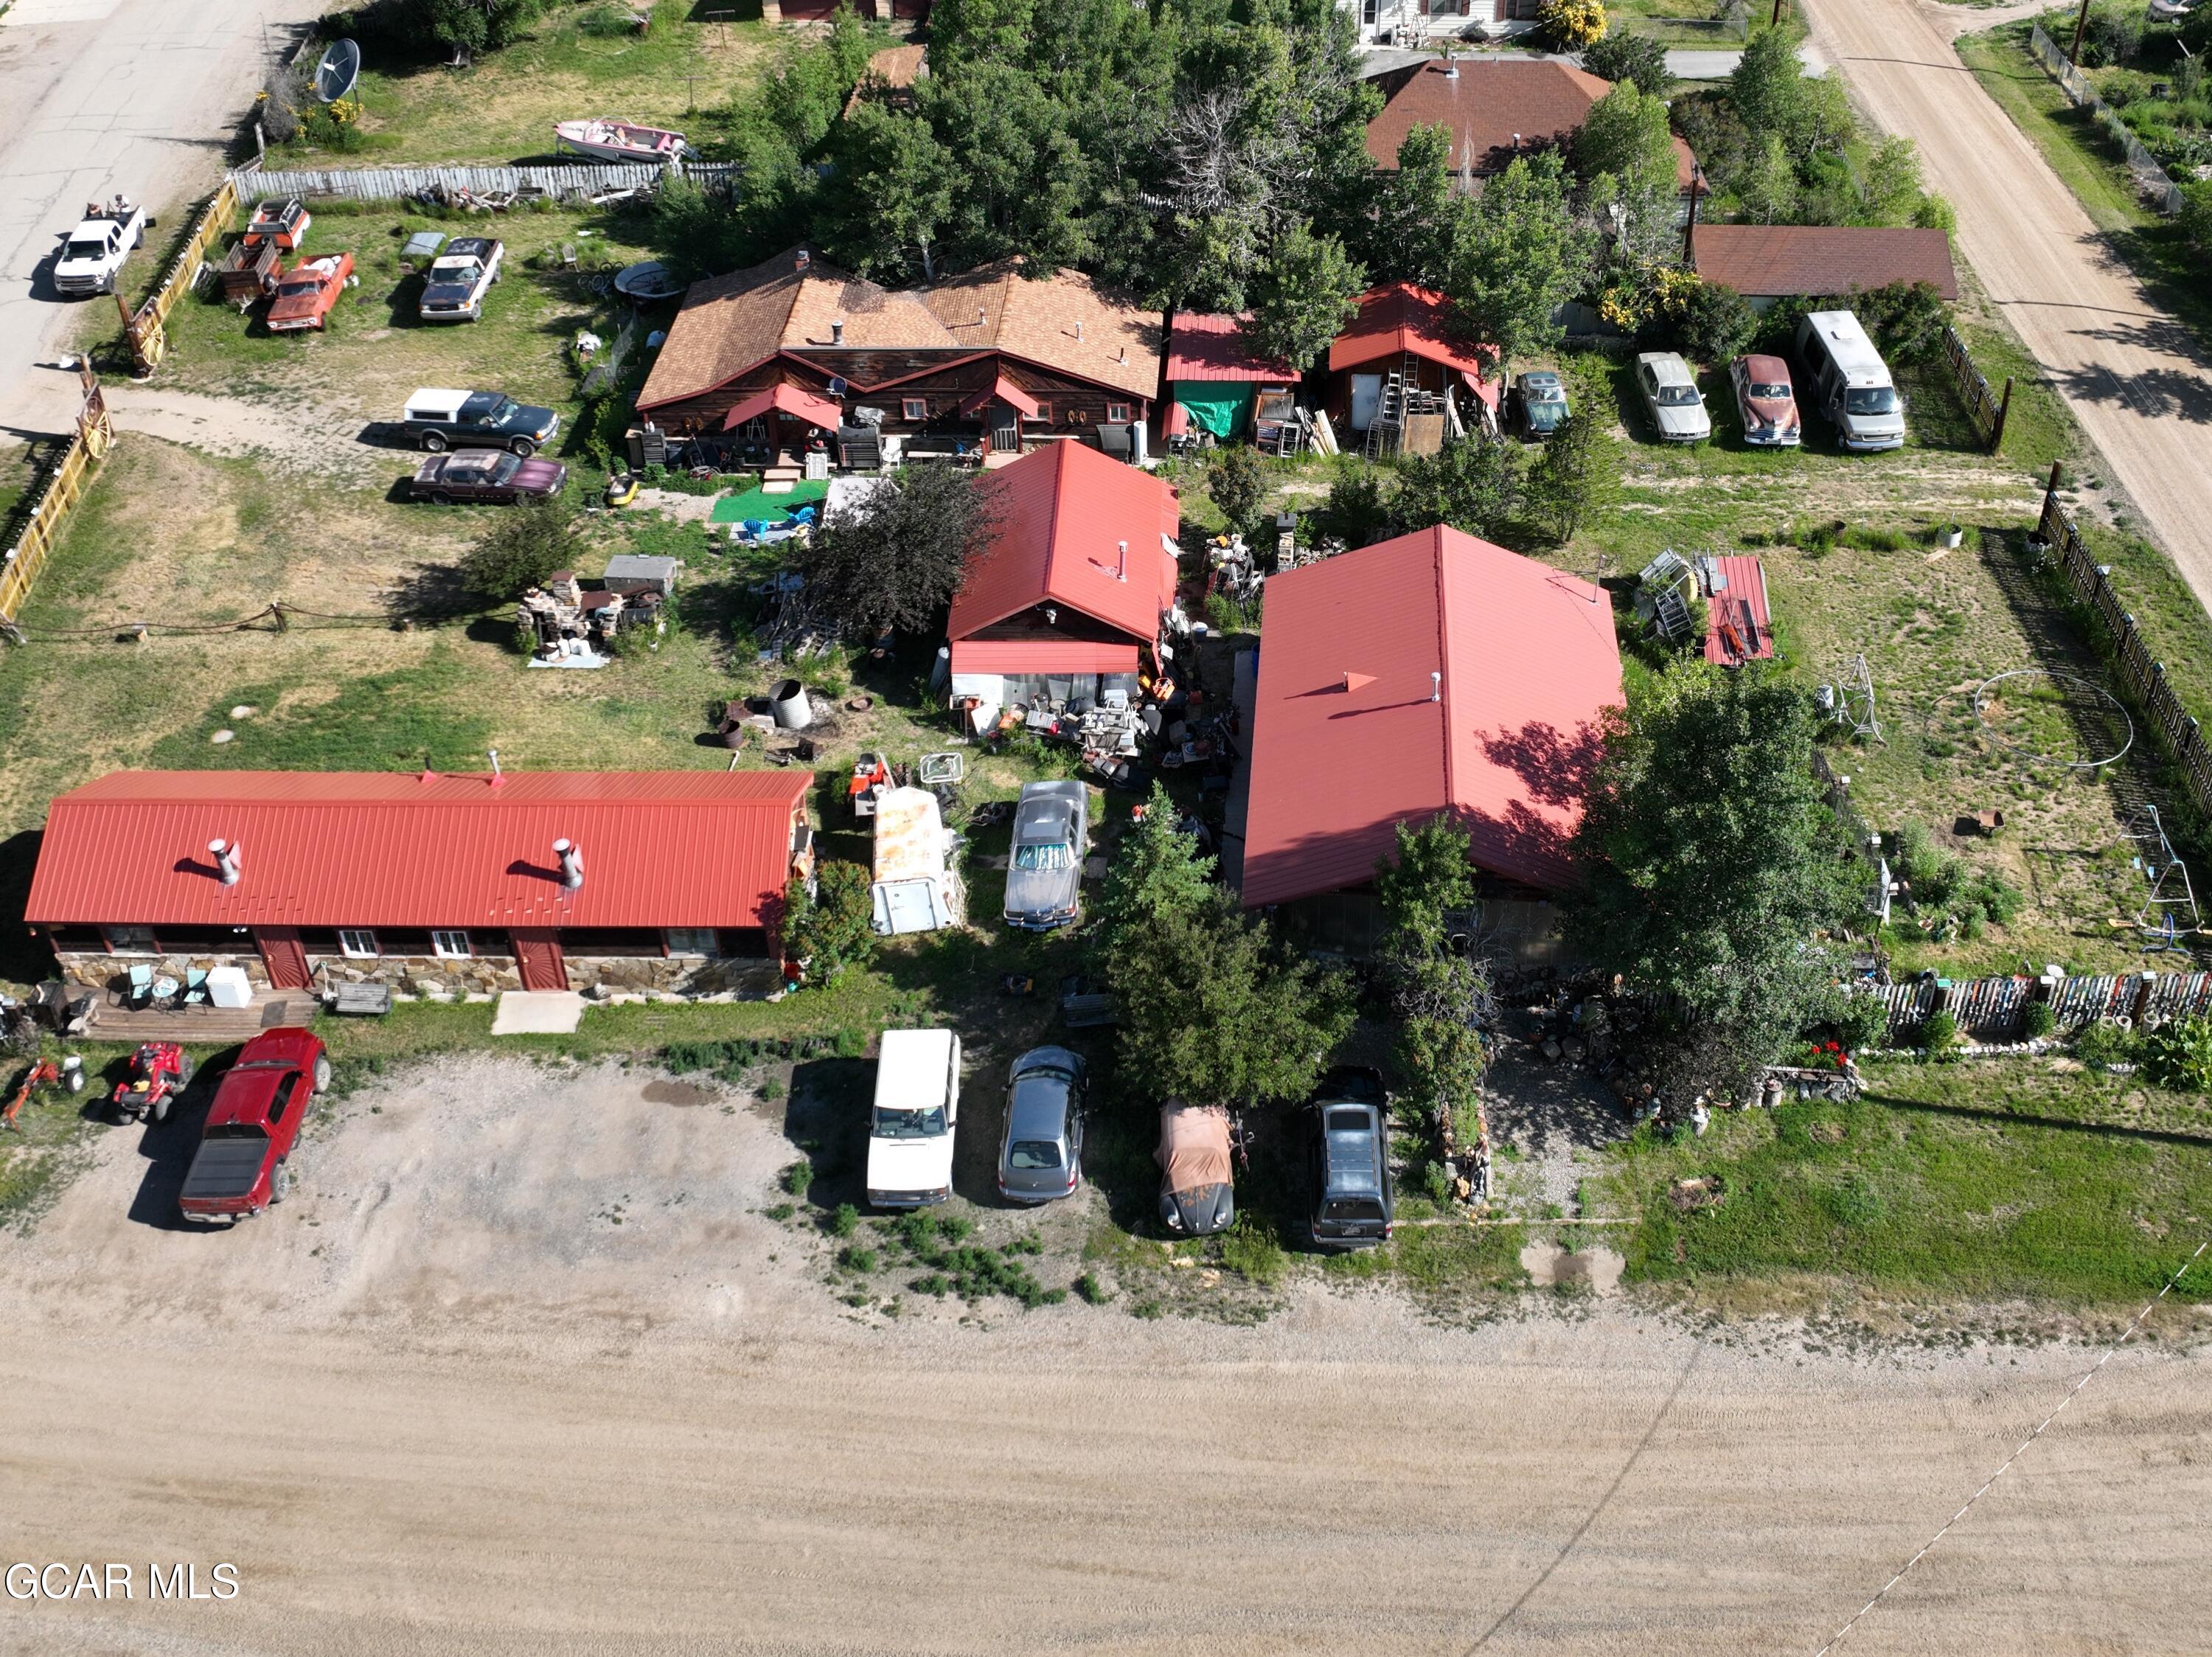 an aerial view of a houses with outdoor space